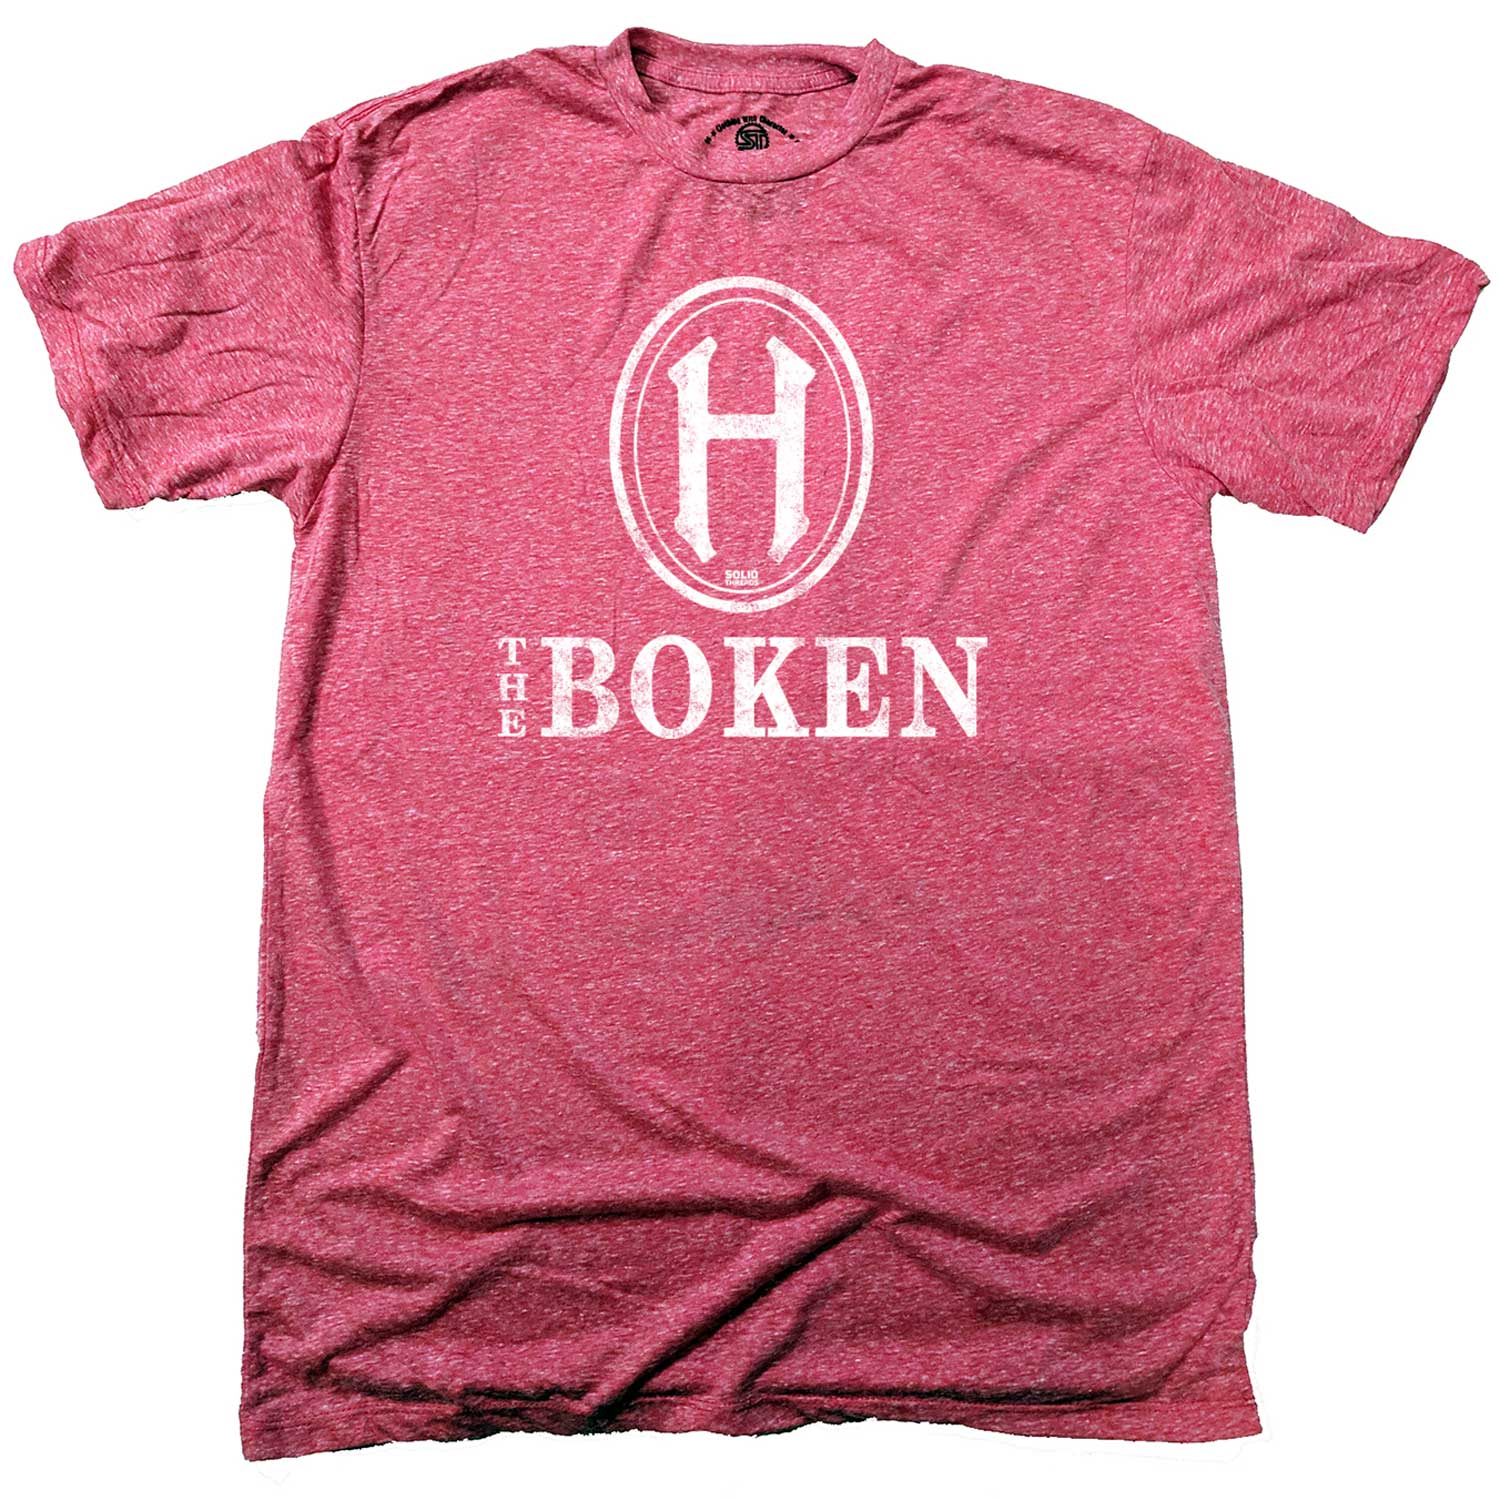 Men's The Boken Vintage Graphic T-Shirt | Cool New Jersey Triblend Red Tee | Solid Threads